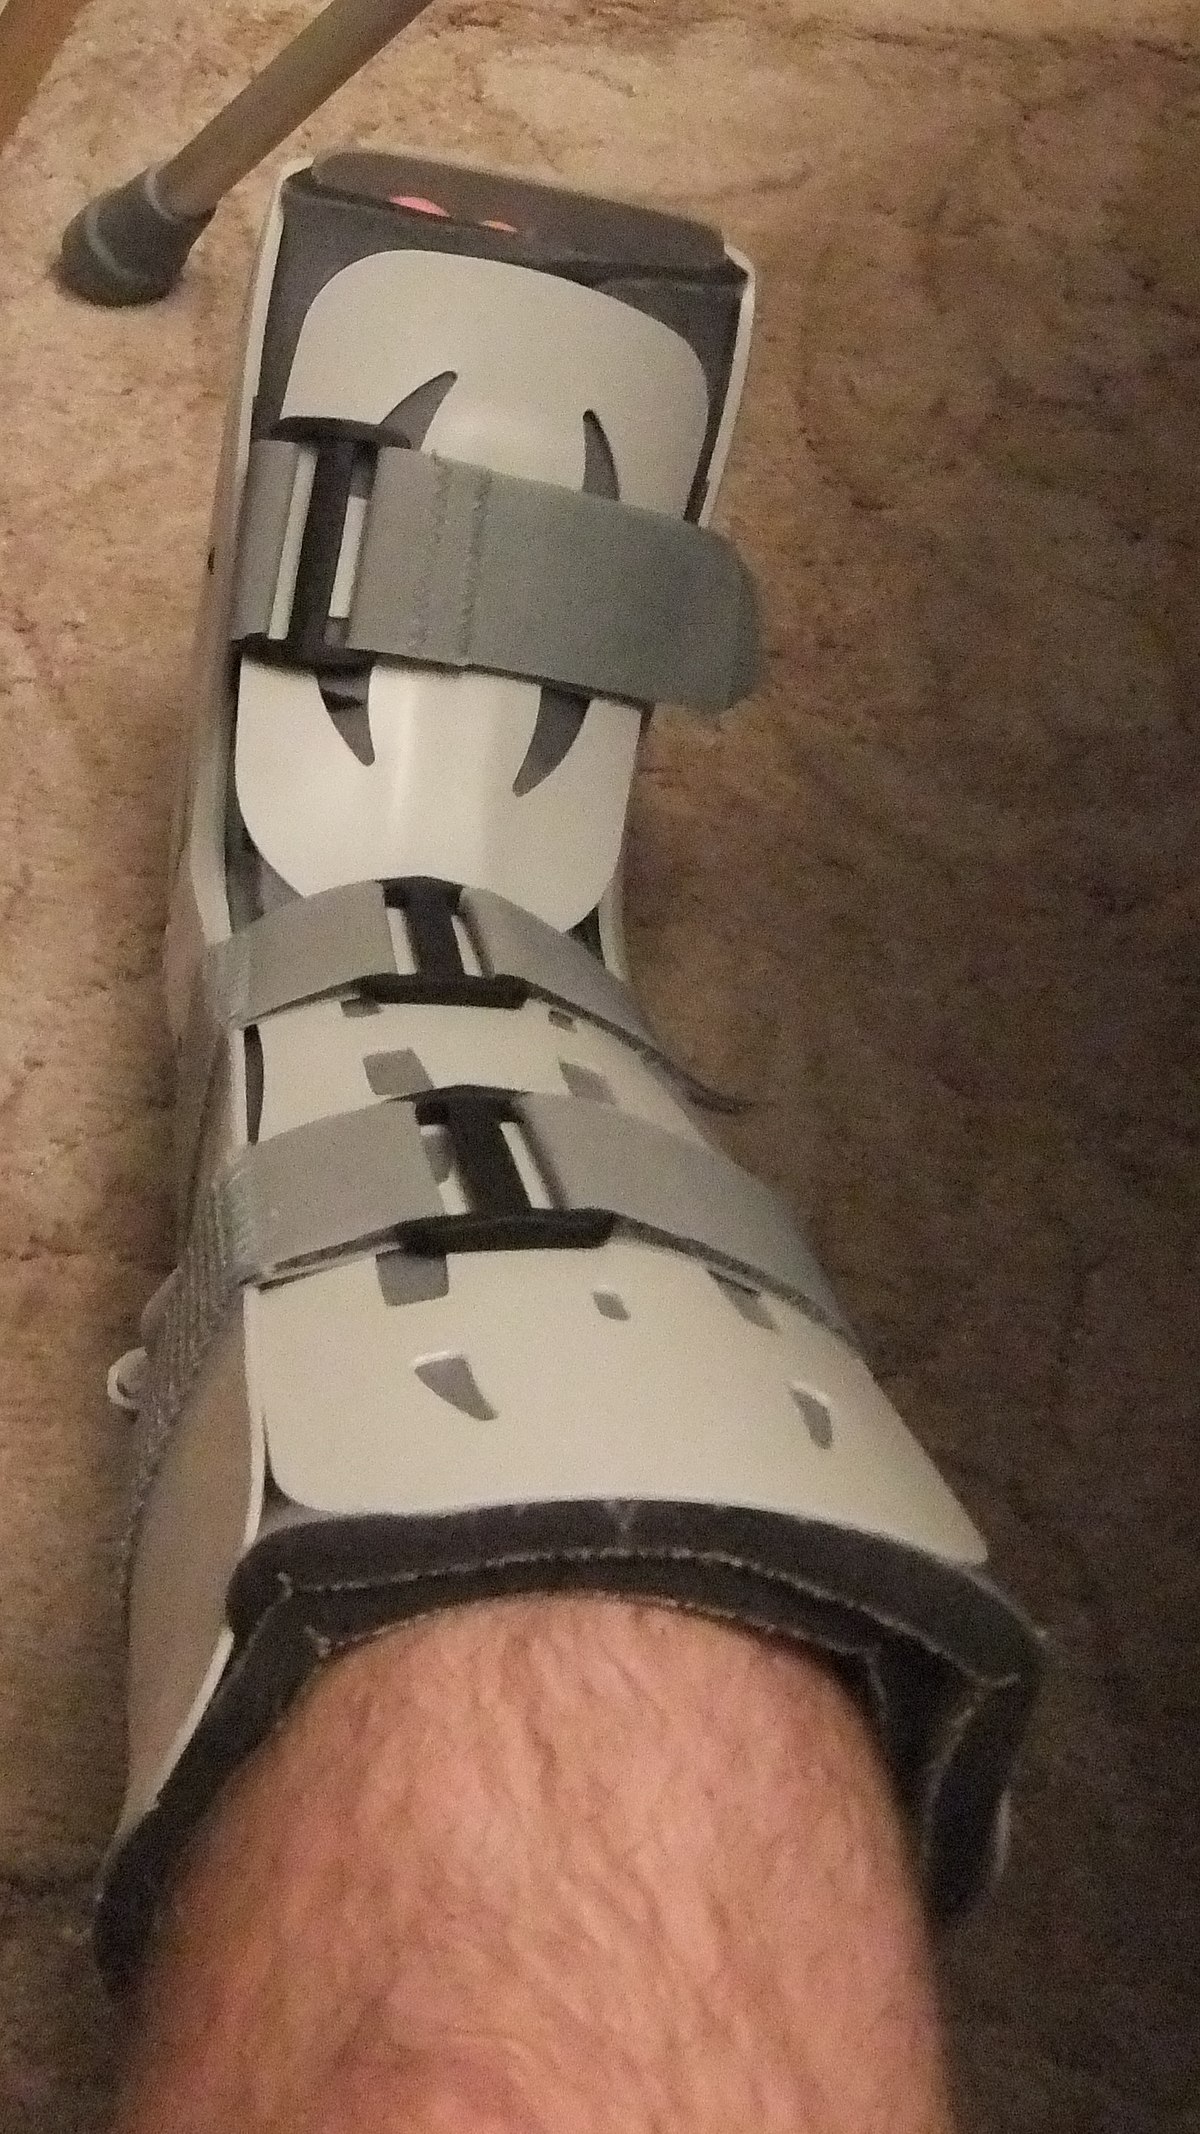 support boots for broken ankle